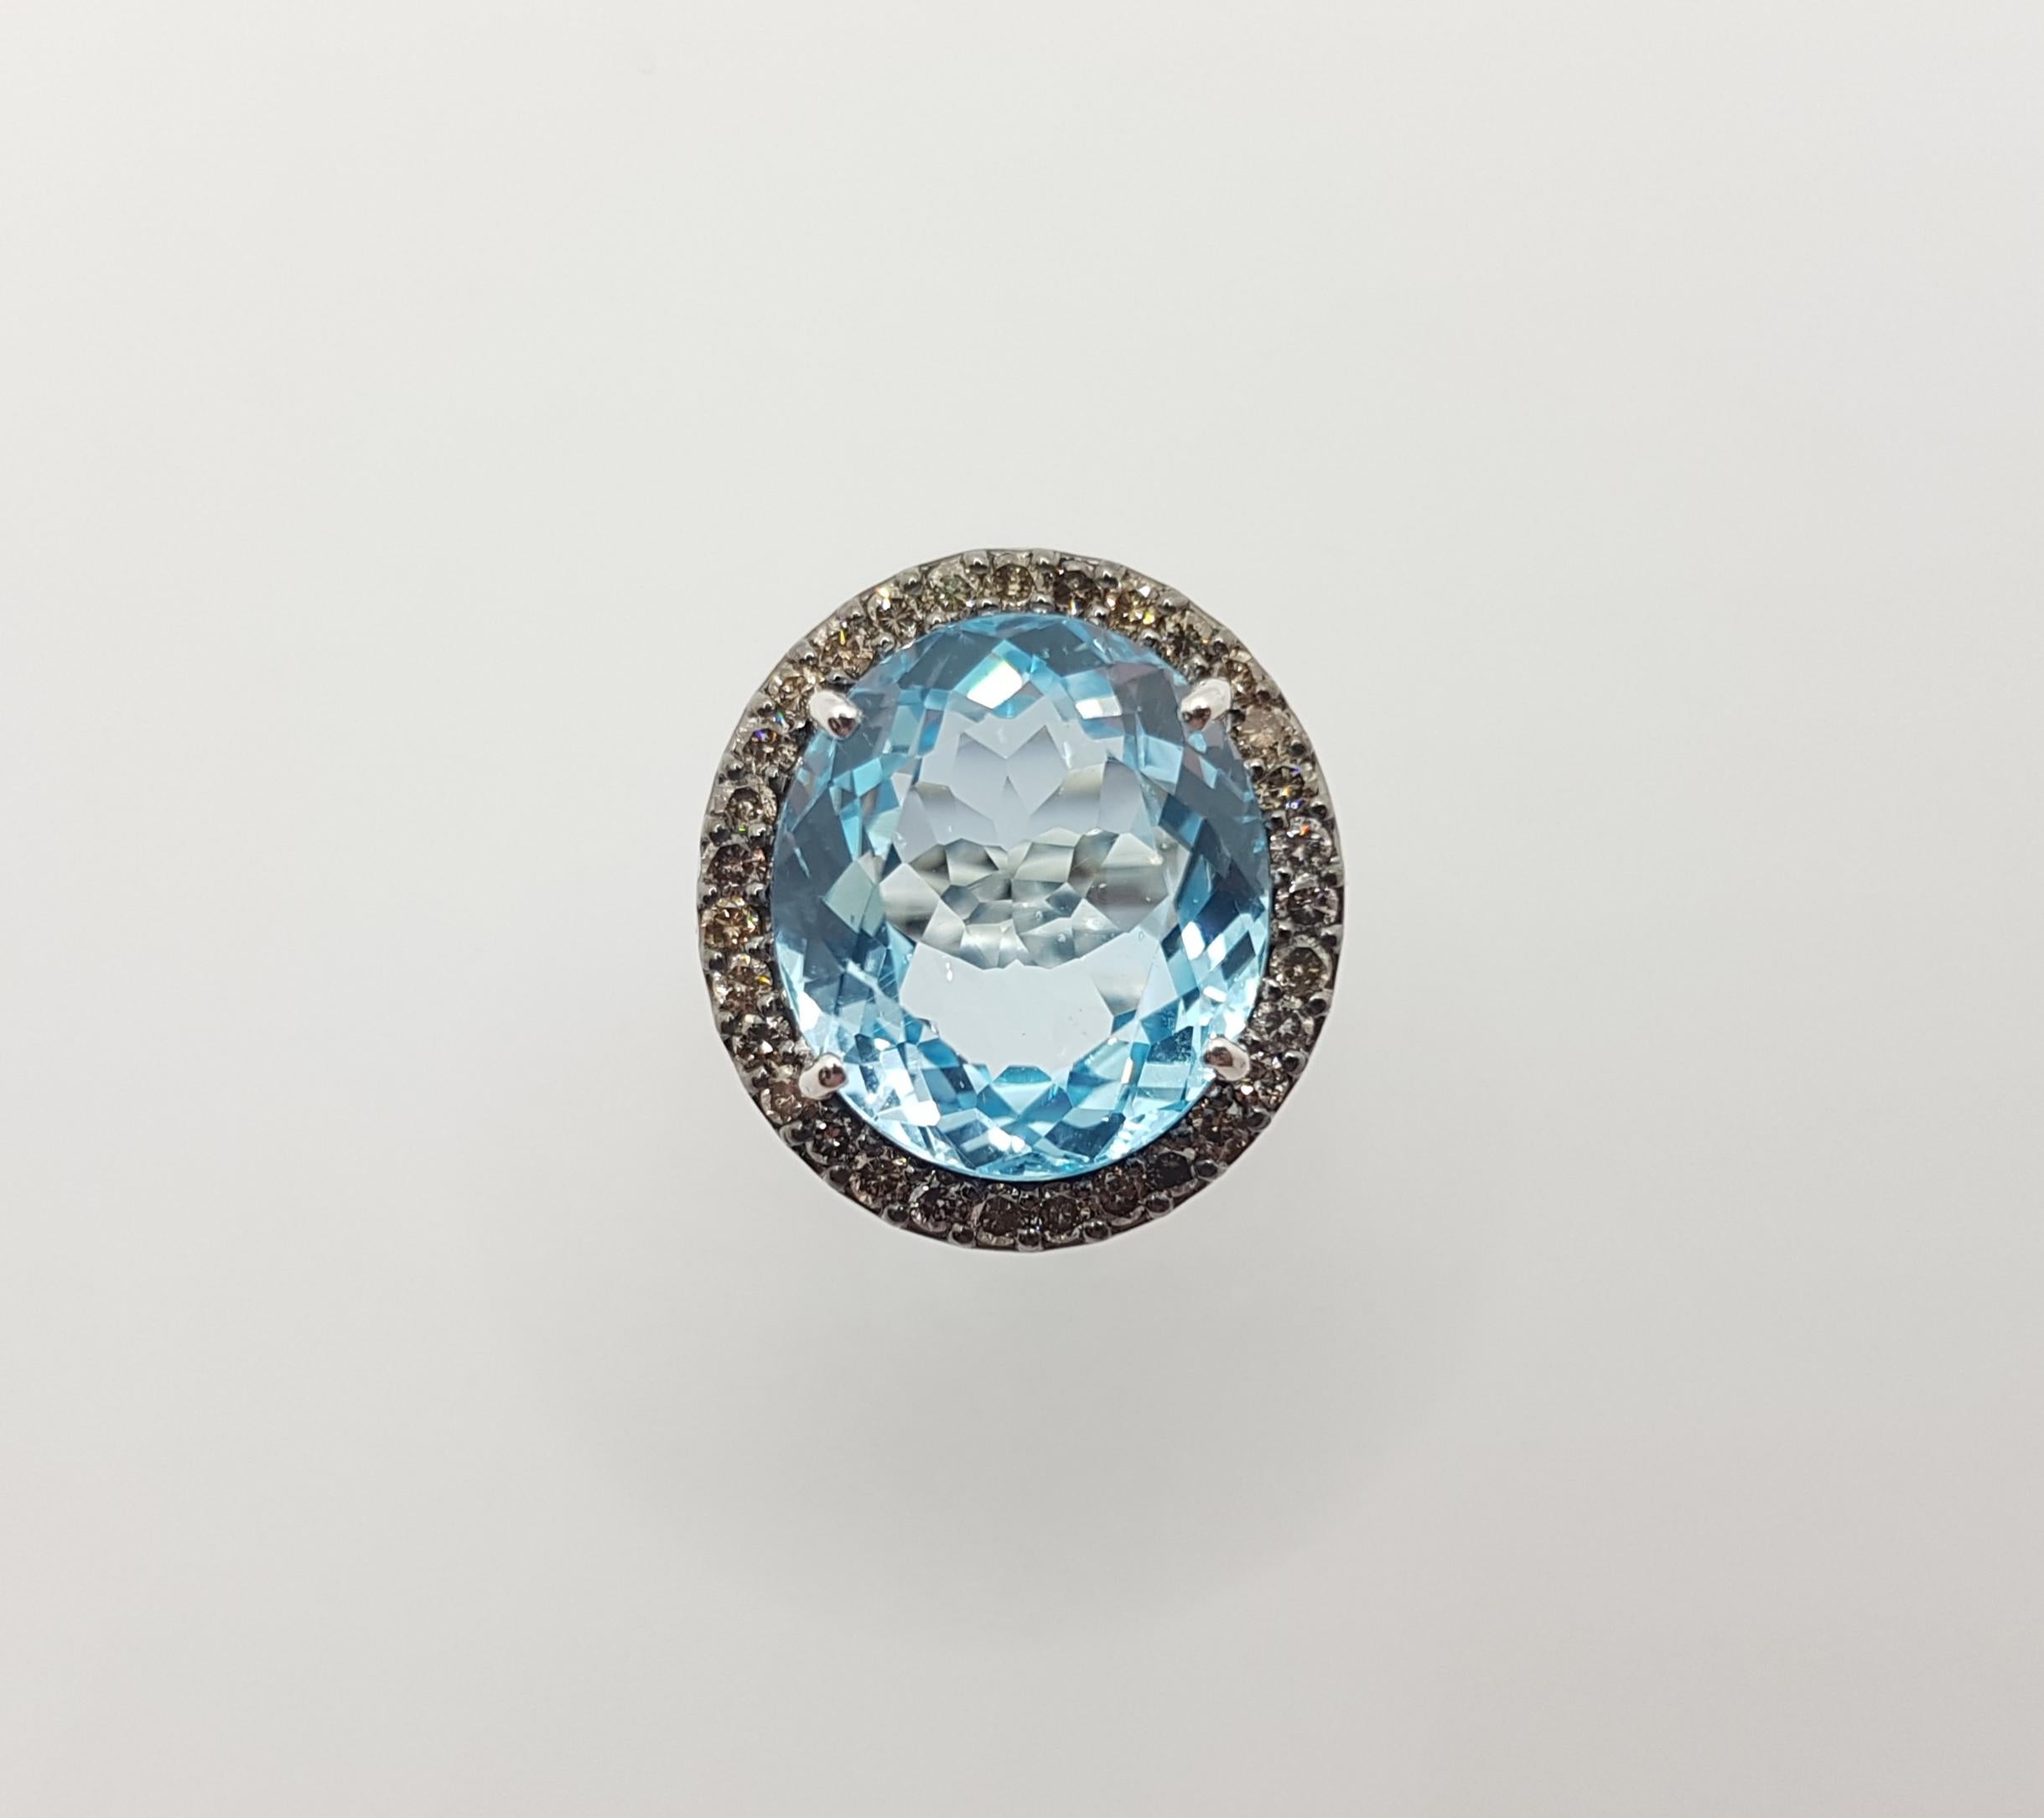 Blue Topaz 13.80 carats with Brown Diamond 0.96 carat Ring set in 18 Karat White Gold Settings

Width:  1.8 cm 
Length:2.0 cm
Ring Size: 53
Total Weight: 8.88 grams

